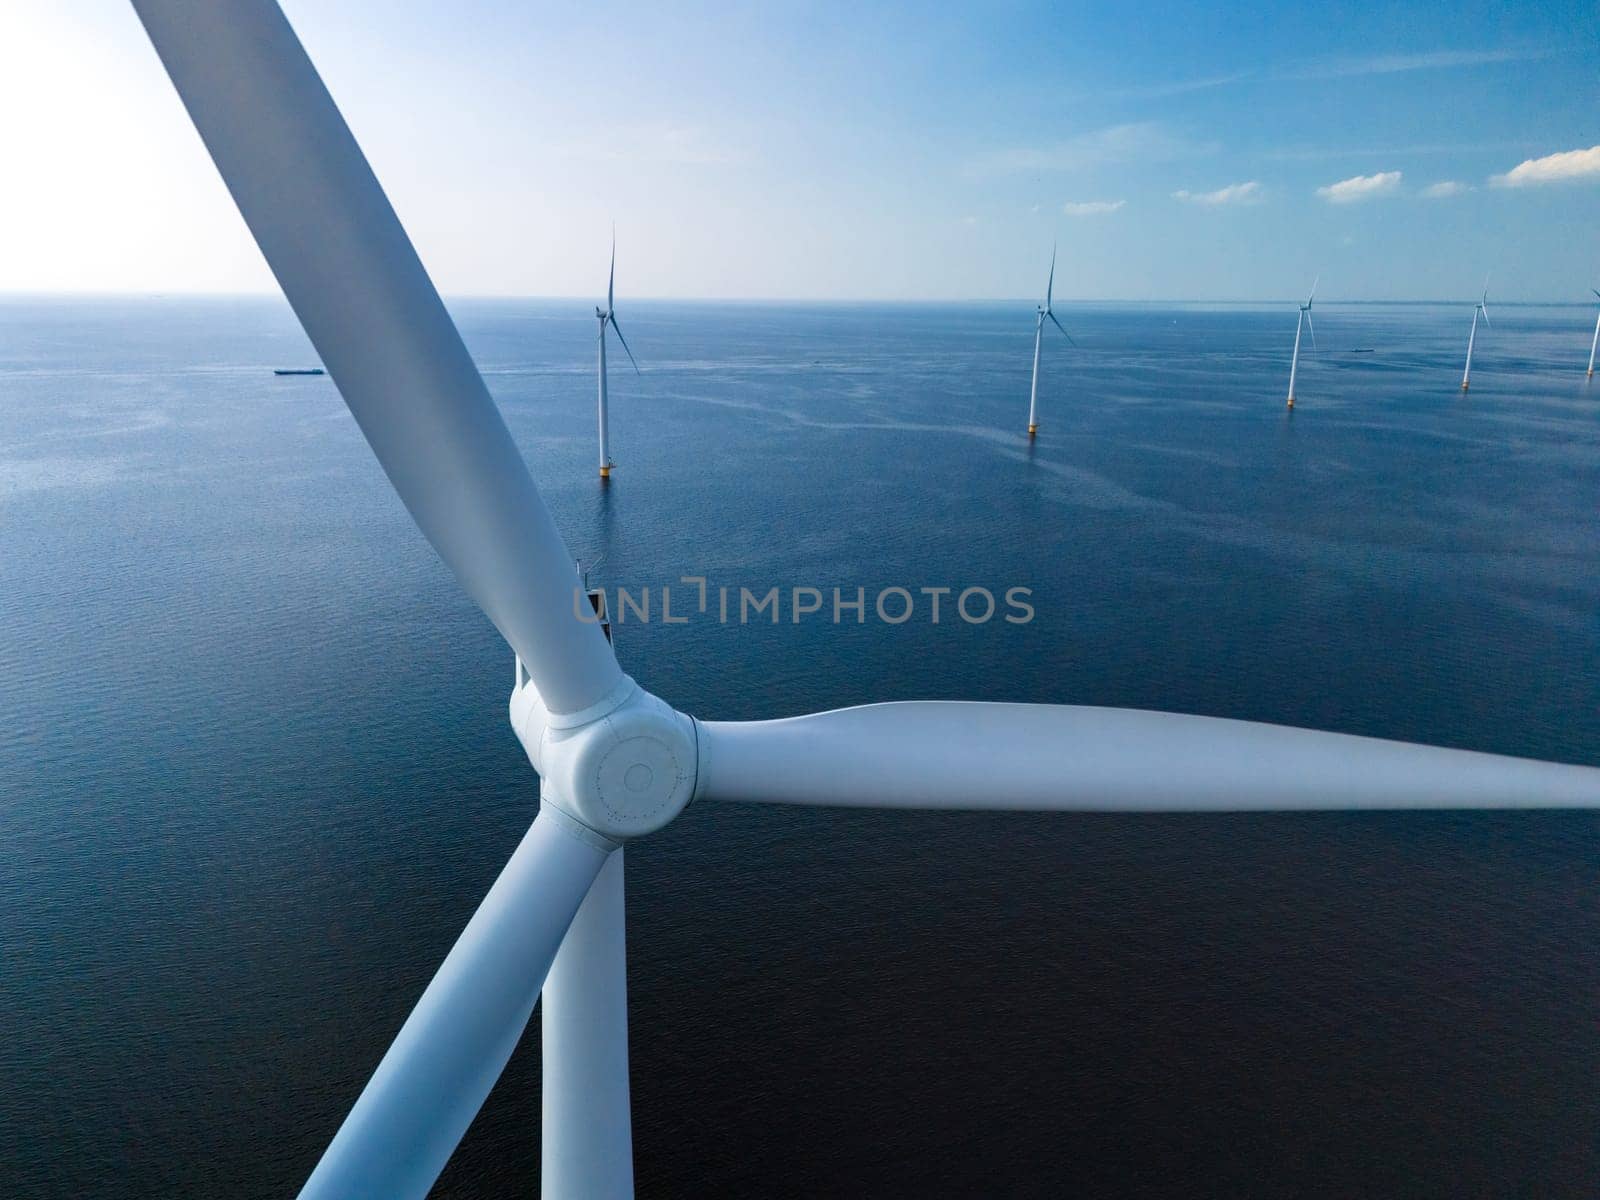 Windmills stand tall in the middle of the ocean, generating clean energy for the Netherlands from the strong sea breezes.